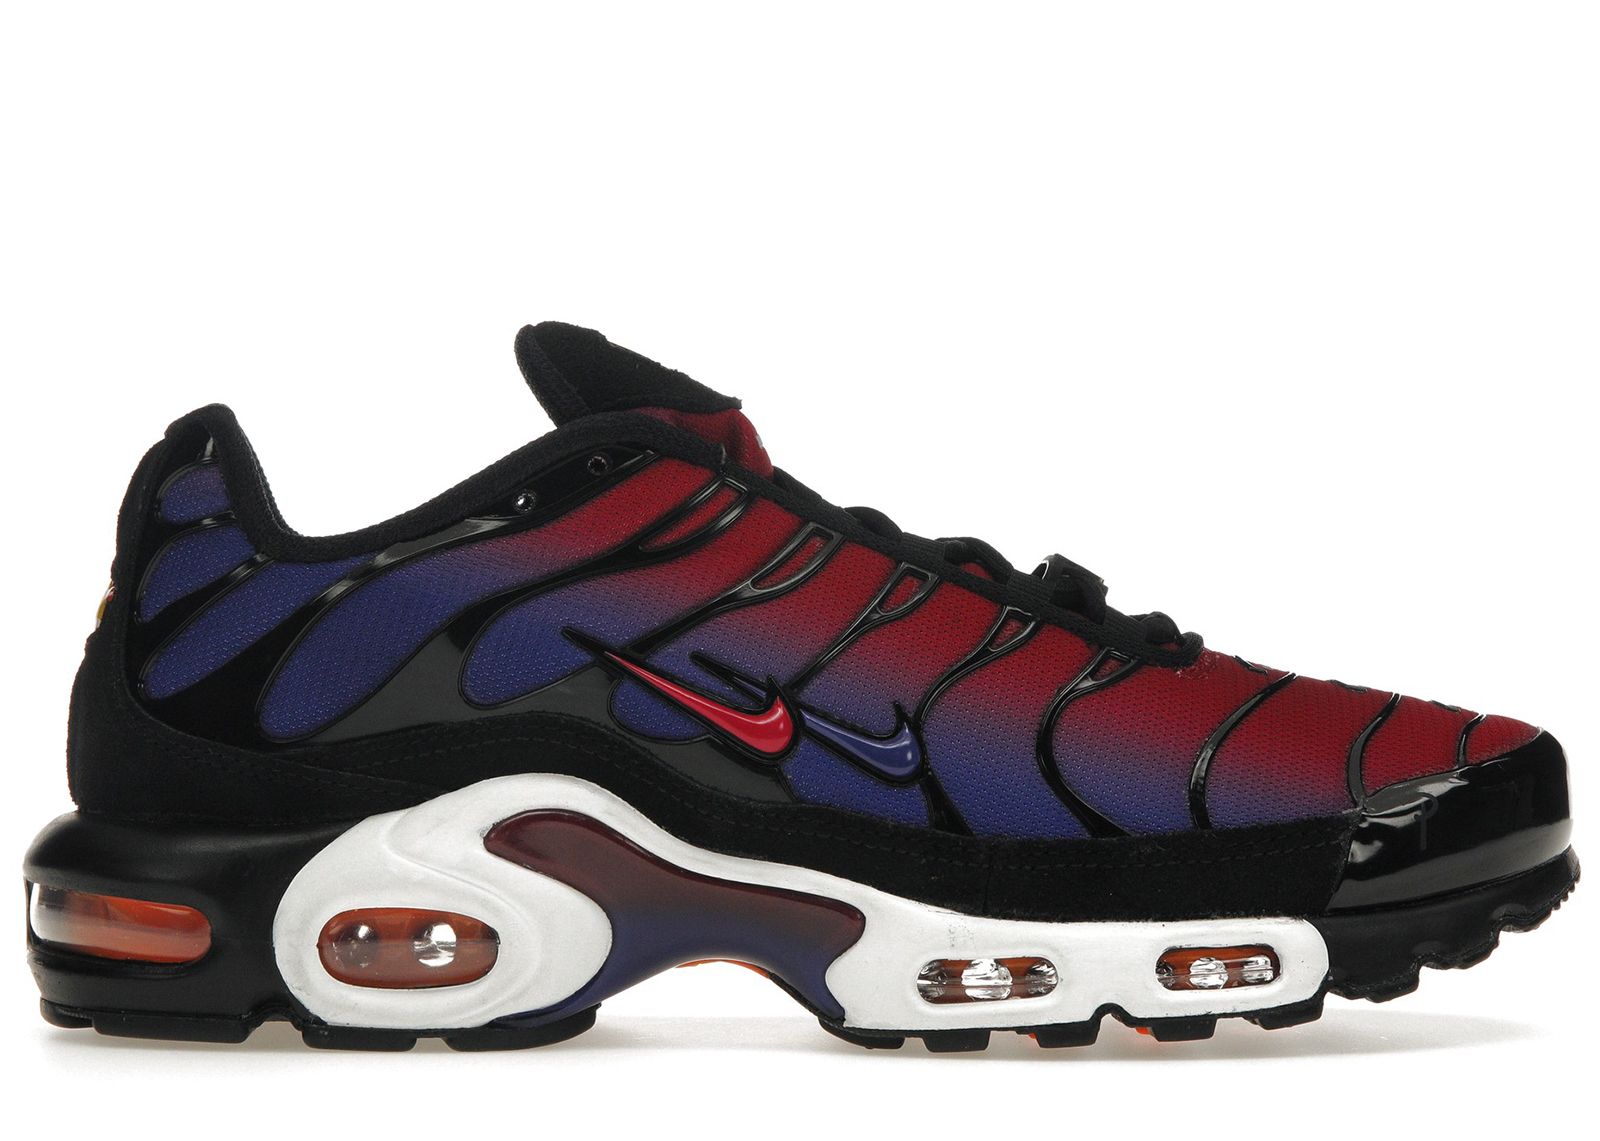 Buy Nike Air Max Plus Shoes & New Sneakers   StockX